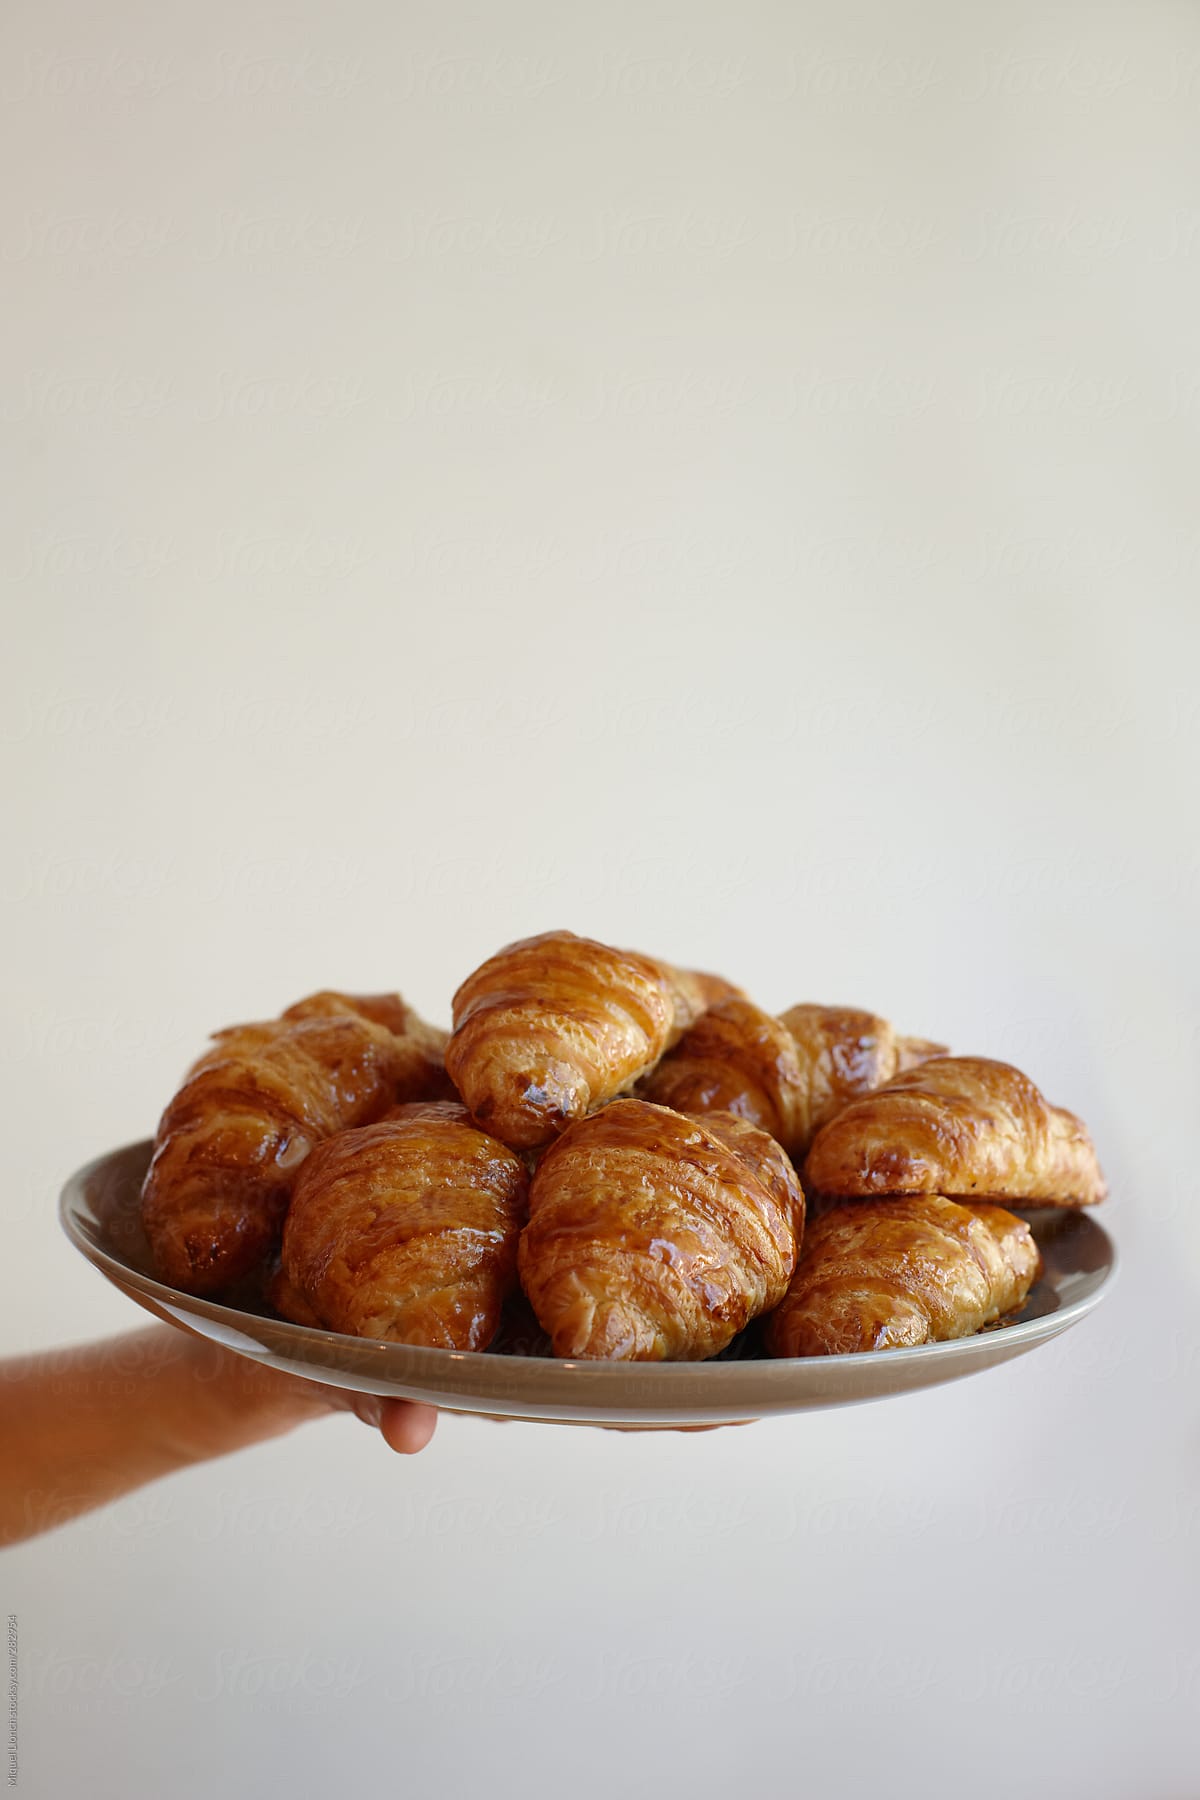 Hand holding a plate of fresh baked croissants